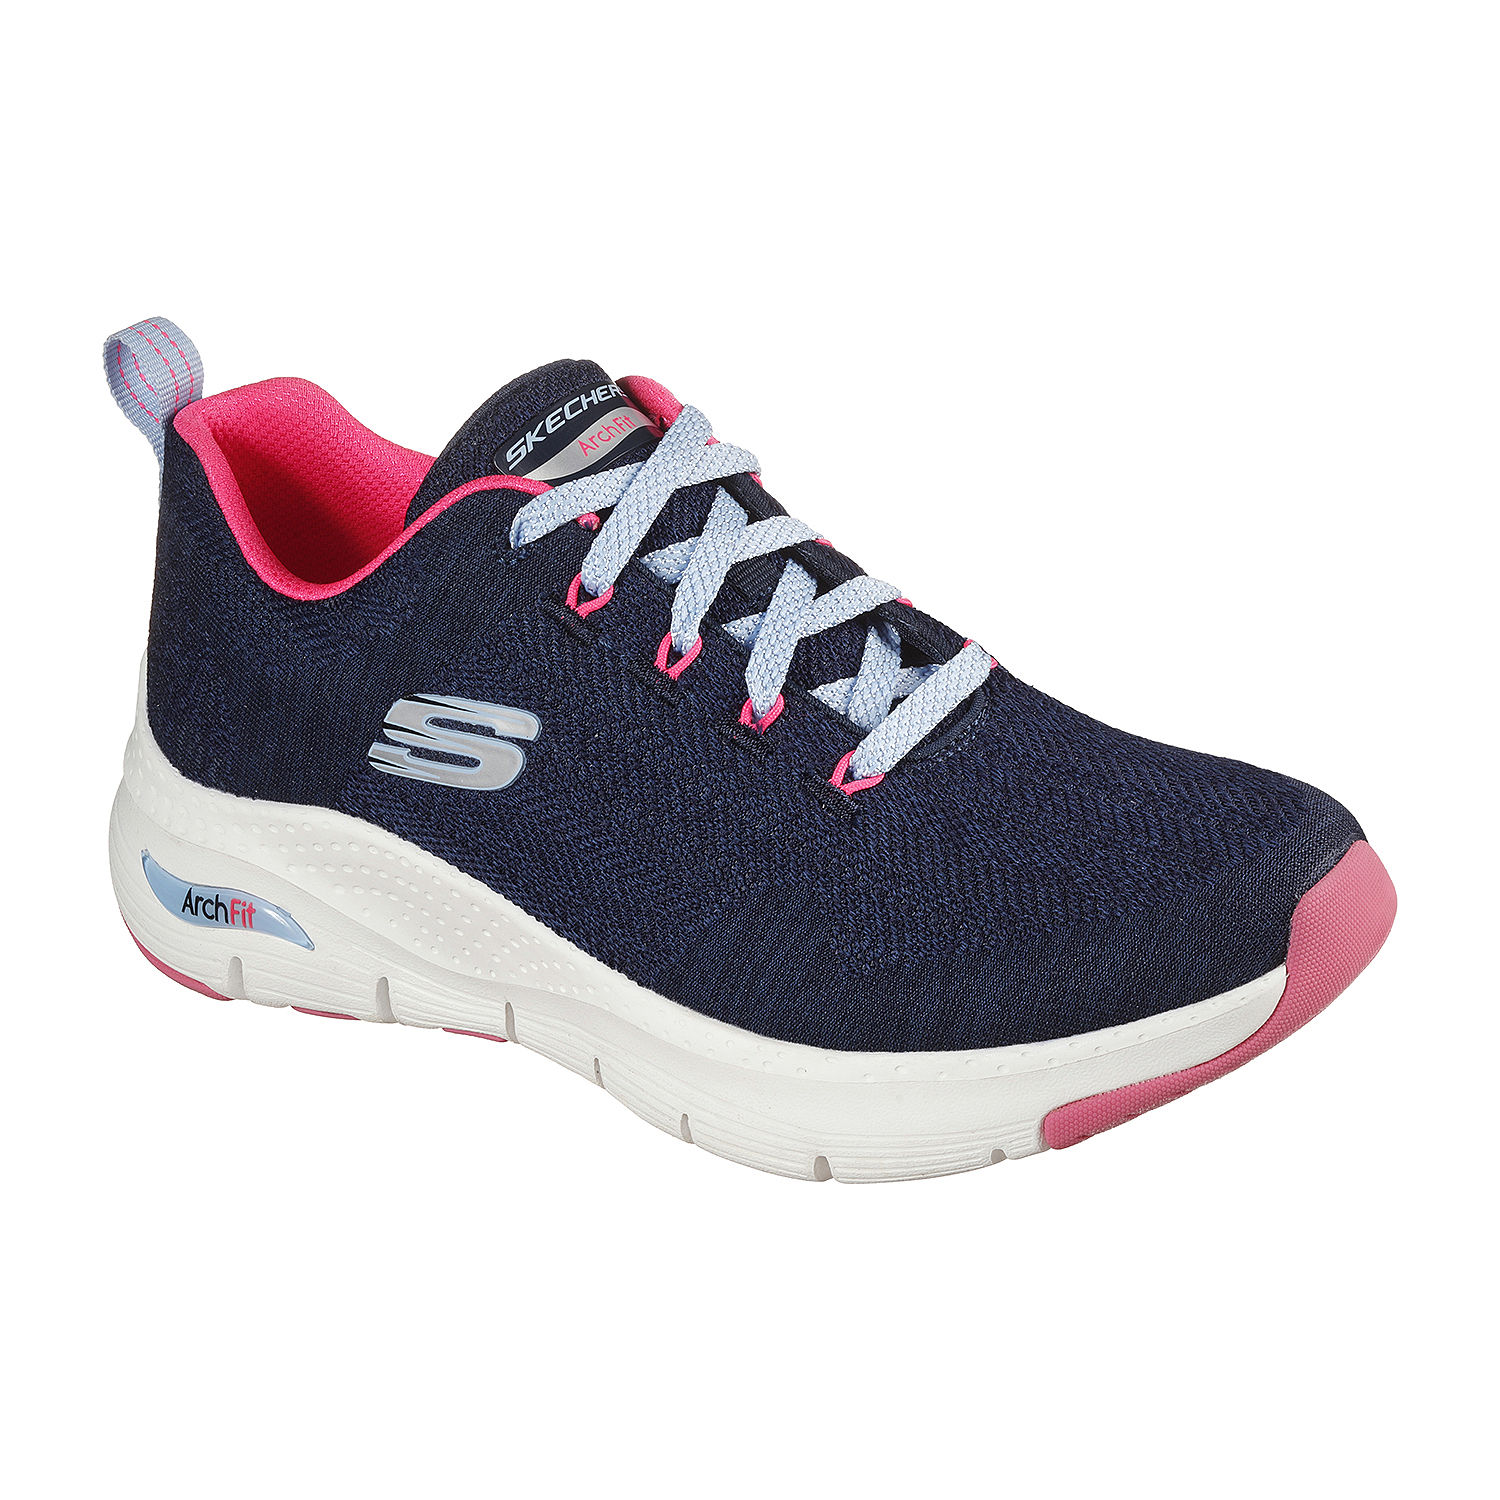 Skechers Womens Arch Fit Walking Shoes - JCPenney